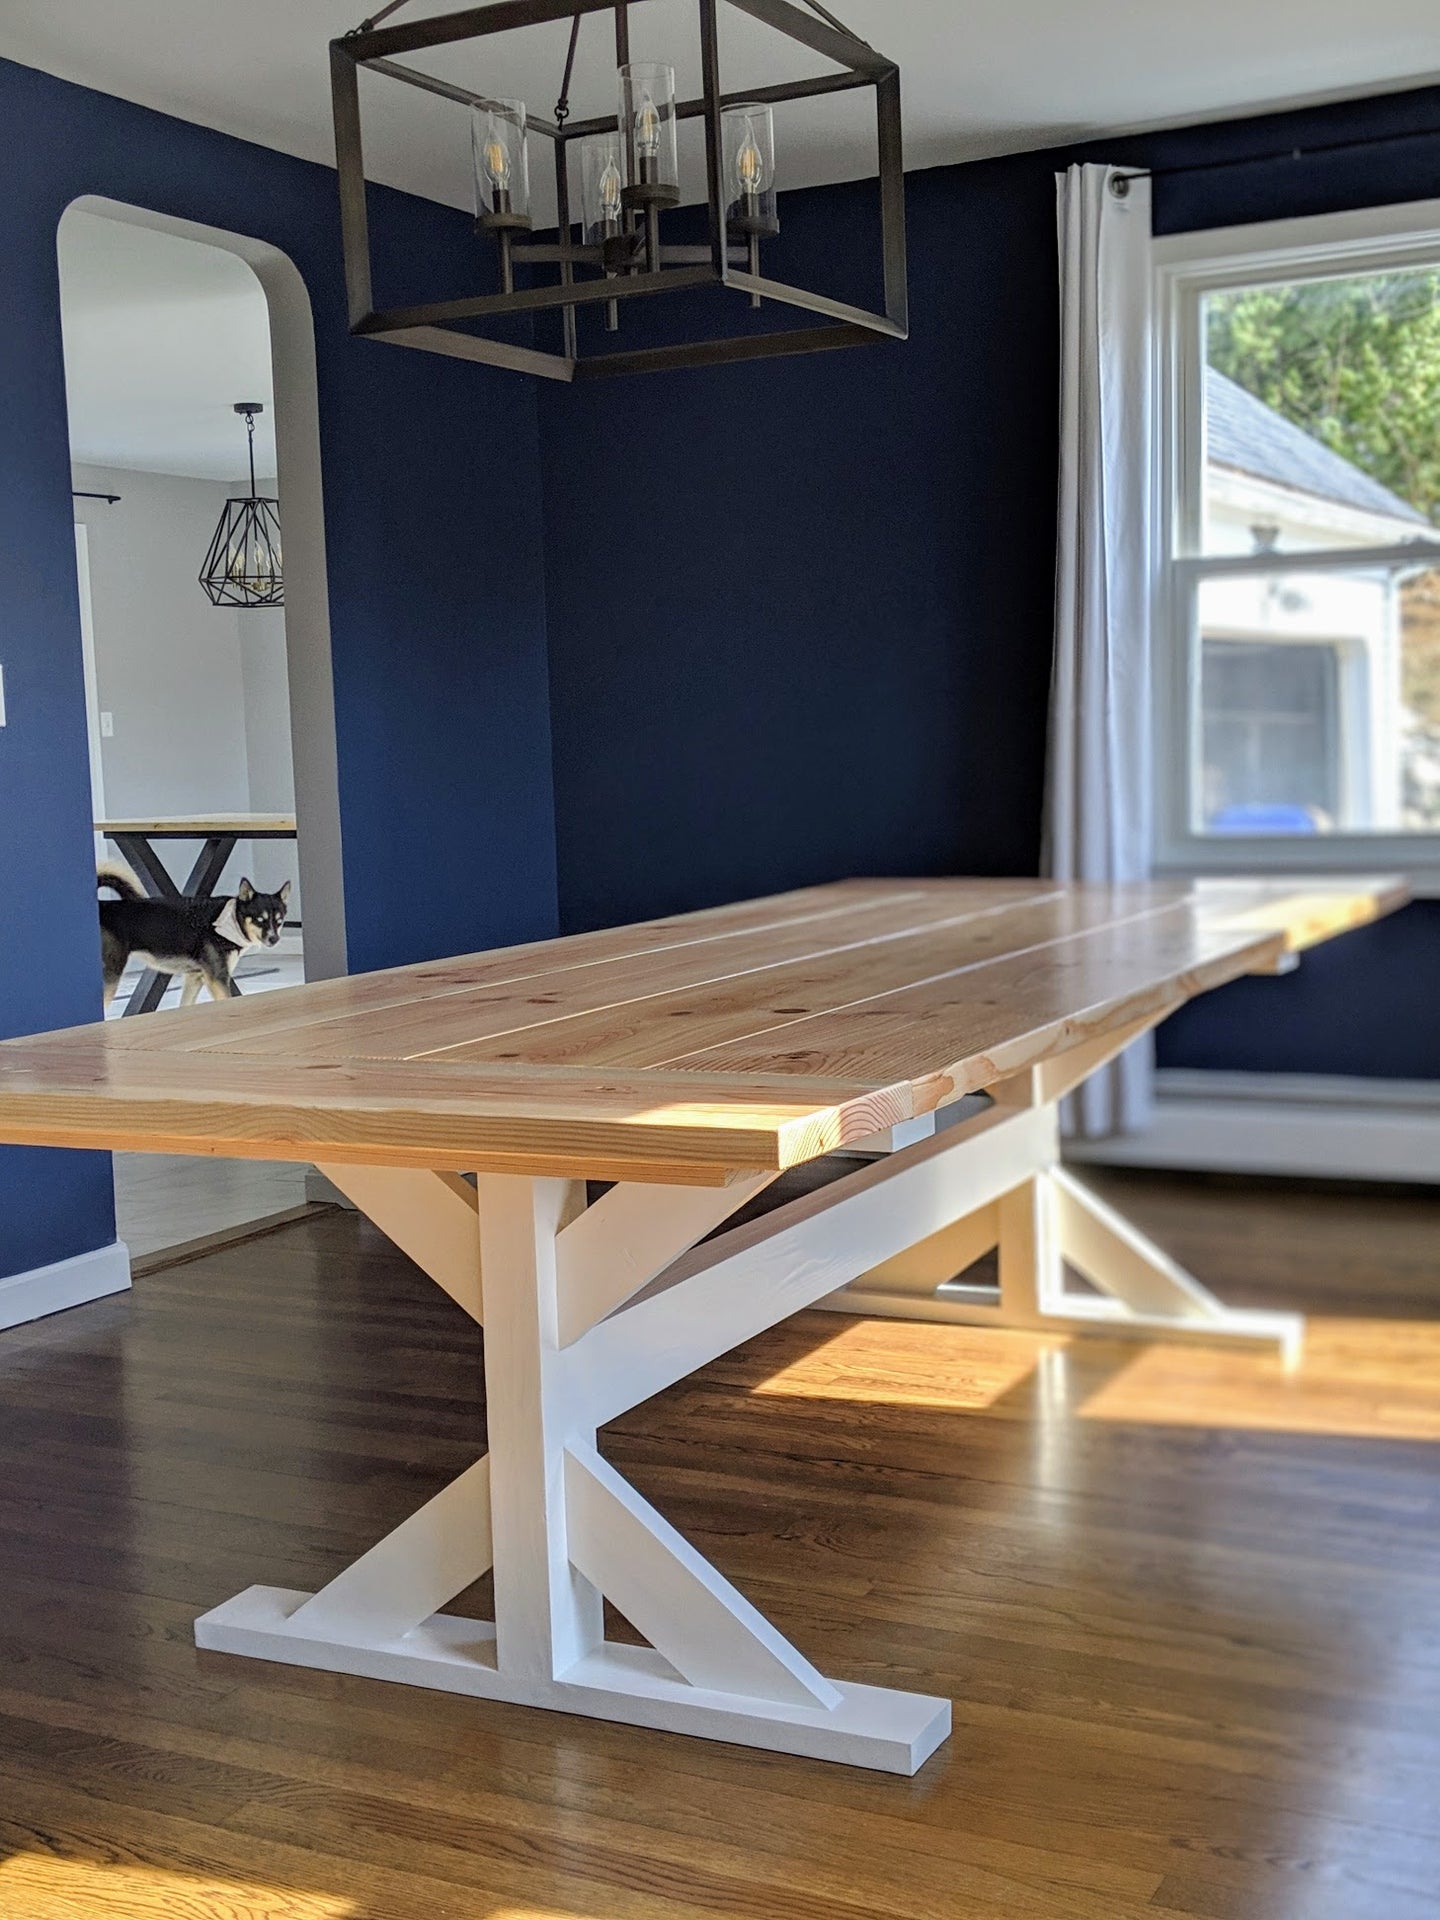 Custom dining table created with wood and metal base.  Custom built furniture designed to exactly what the client desires.  Handcrafted by one craftsman from design to delivery to build your custom furniture in Groton, MA.  Custom farmhouse dining table.